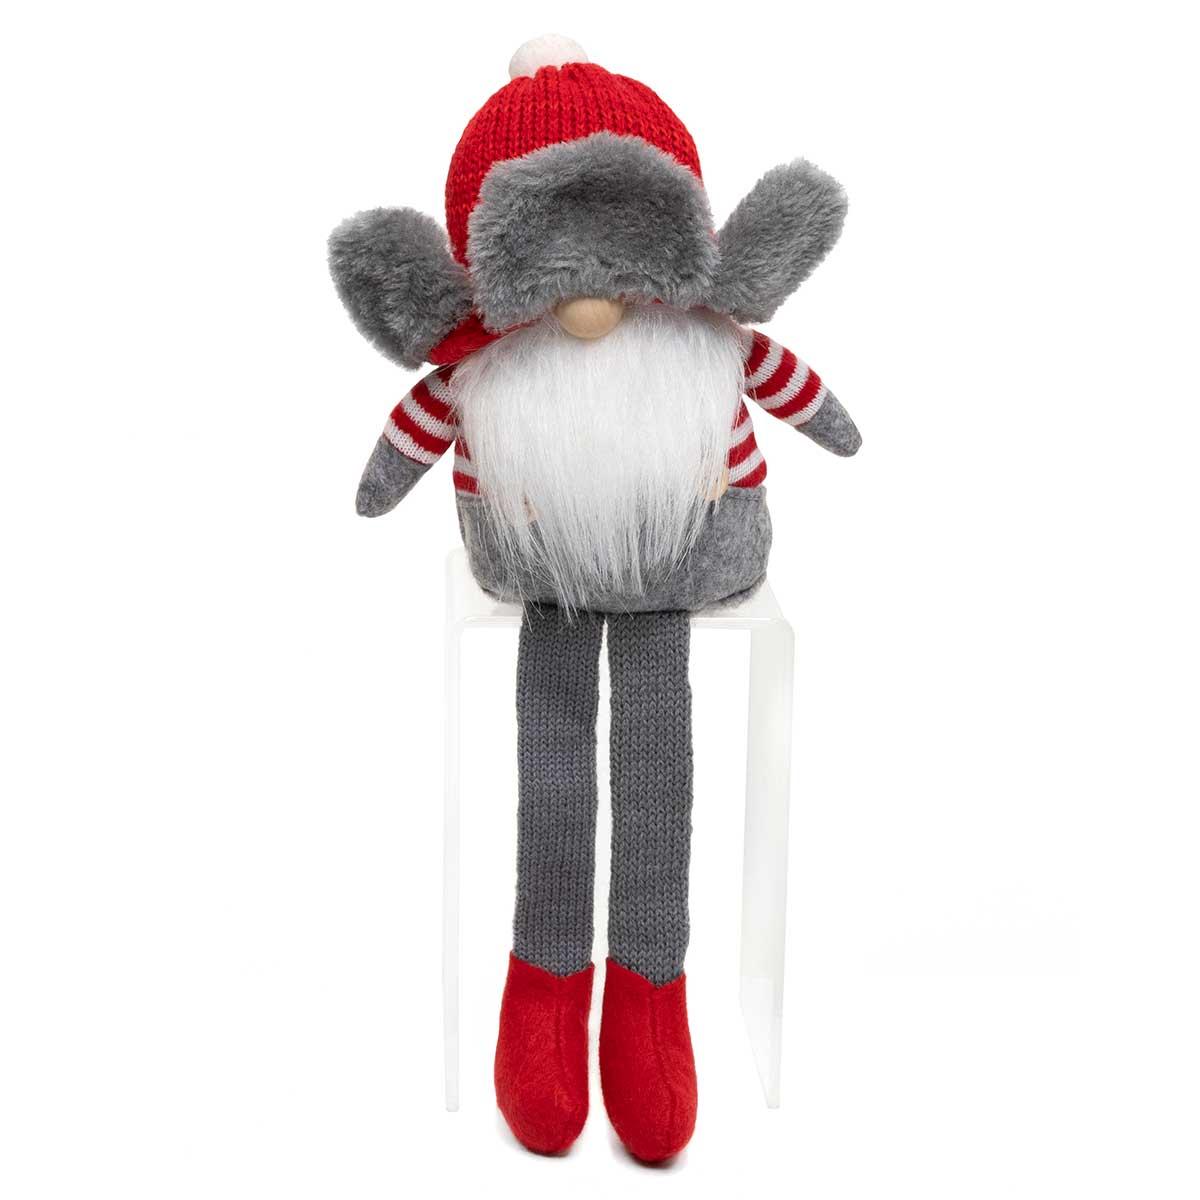 COUSIN EDDY GNOME WITH RED/GREY FLAP HAT FLOPPY LEGS